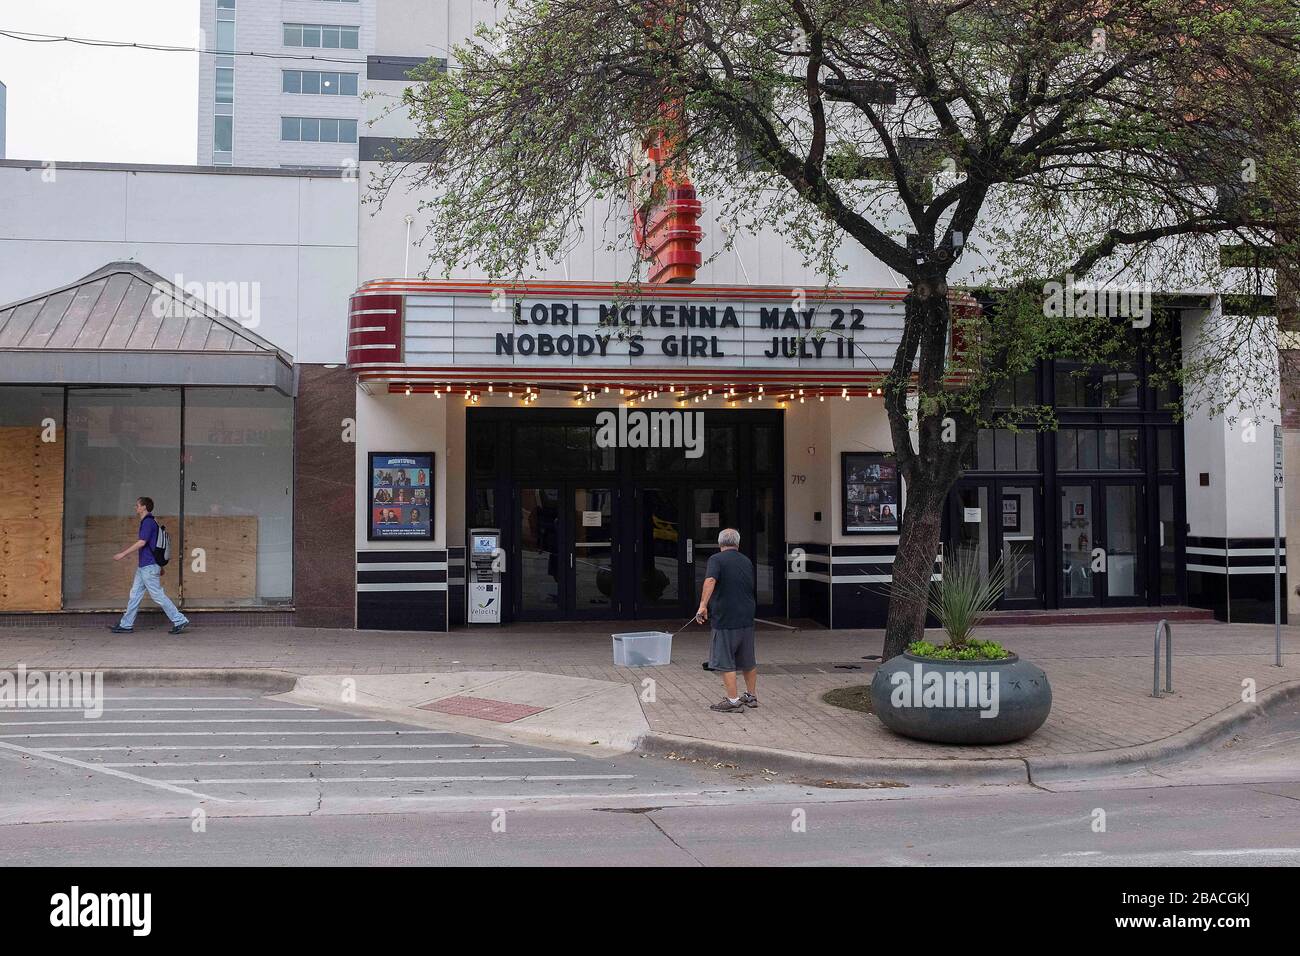 March 26, 2020: The world wide Pandemic Covid-19 impacts business at the Stateside Theatre in Austin, Texas. An employee updates future events that could be coming soon to the Stateside Theatre. Mario Cantu/CSM Stock Photo